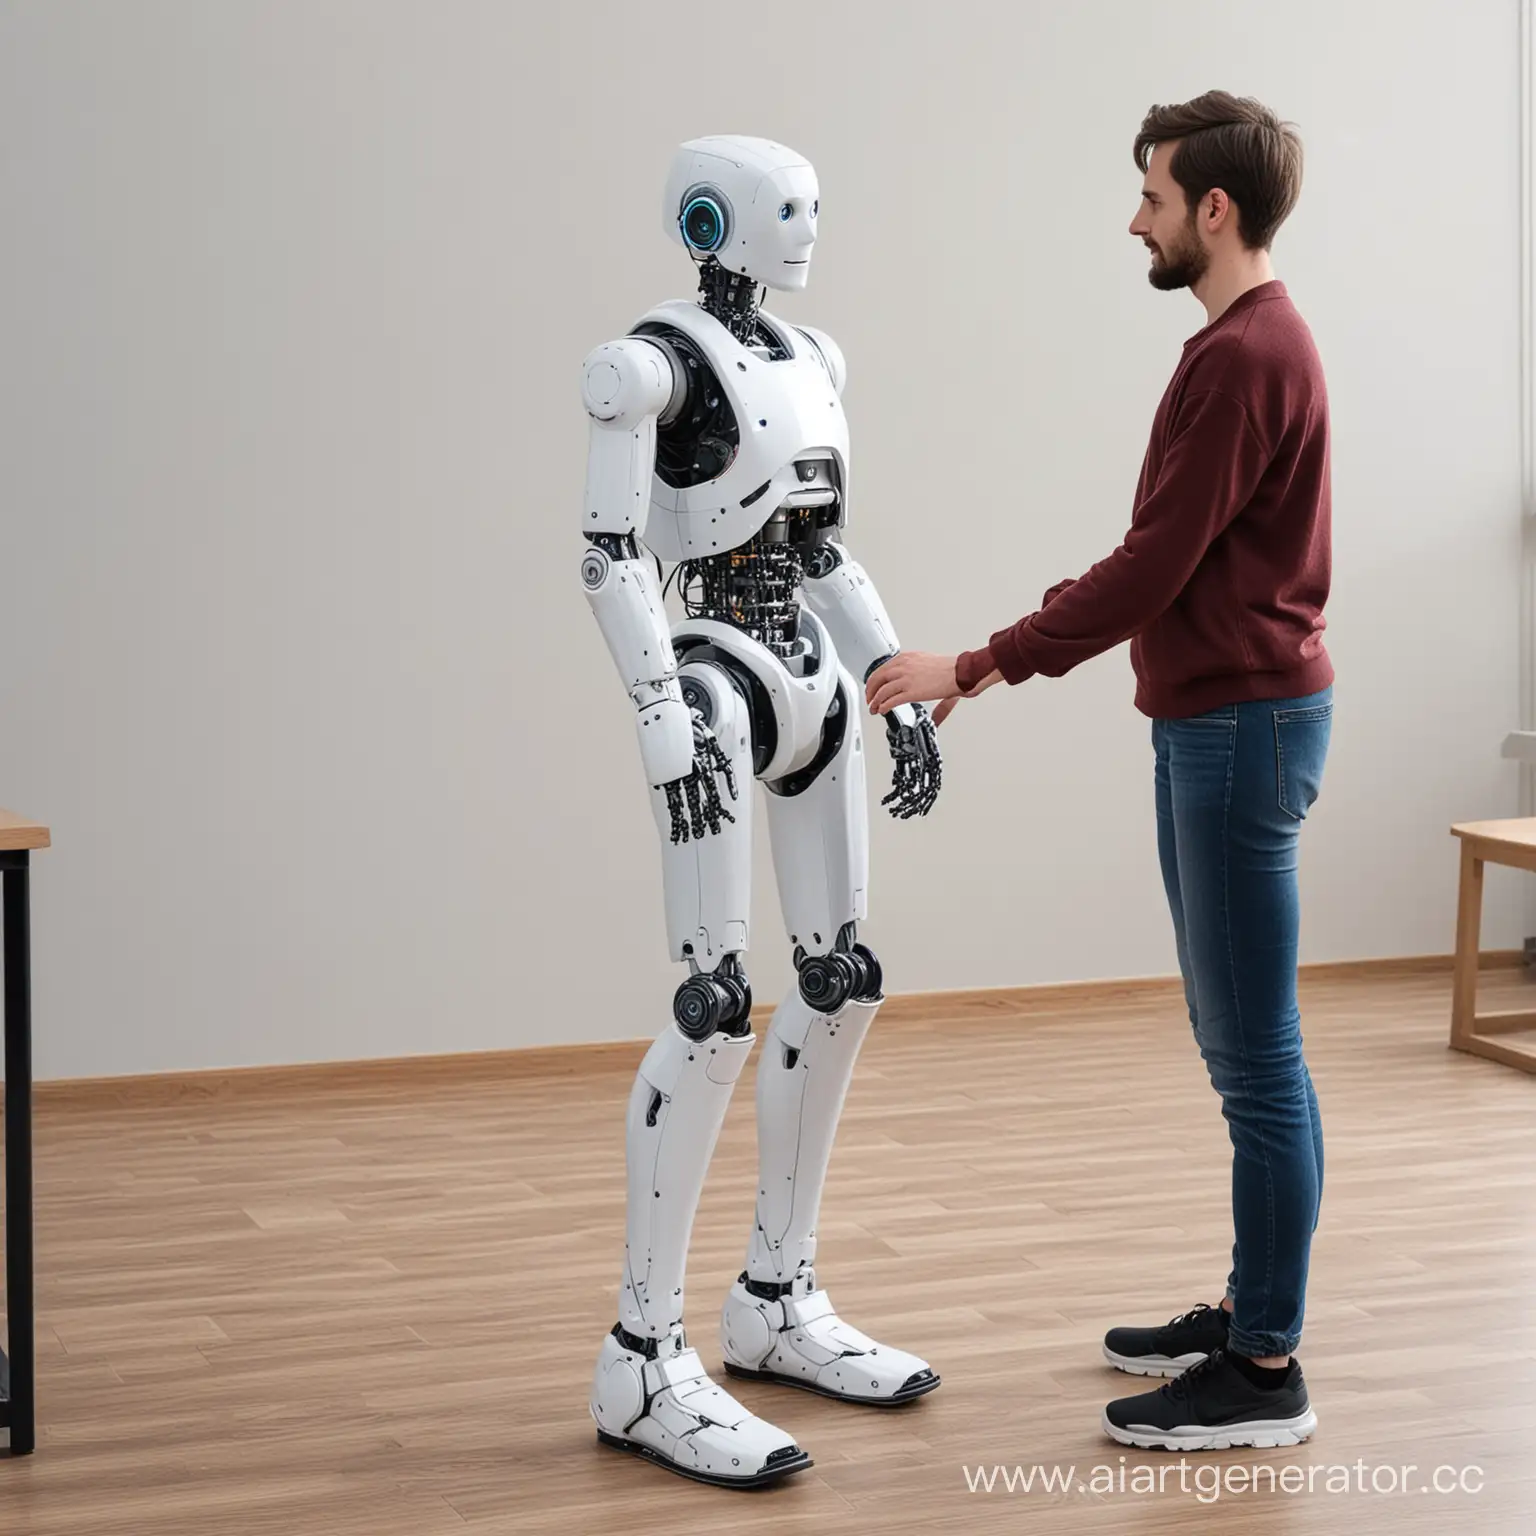 Assistive-Robot-Aiding-a-Person-to-Stand-Up